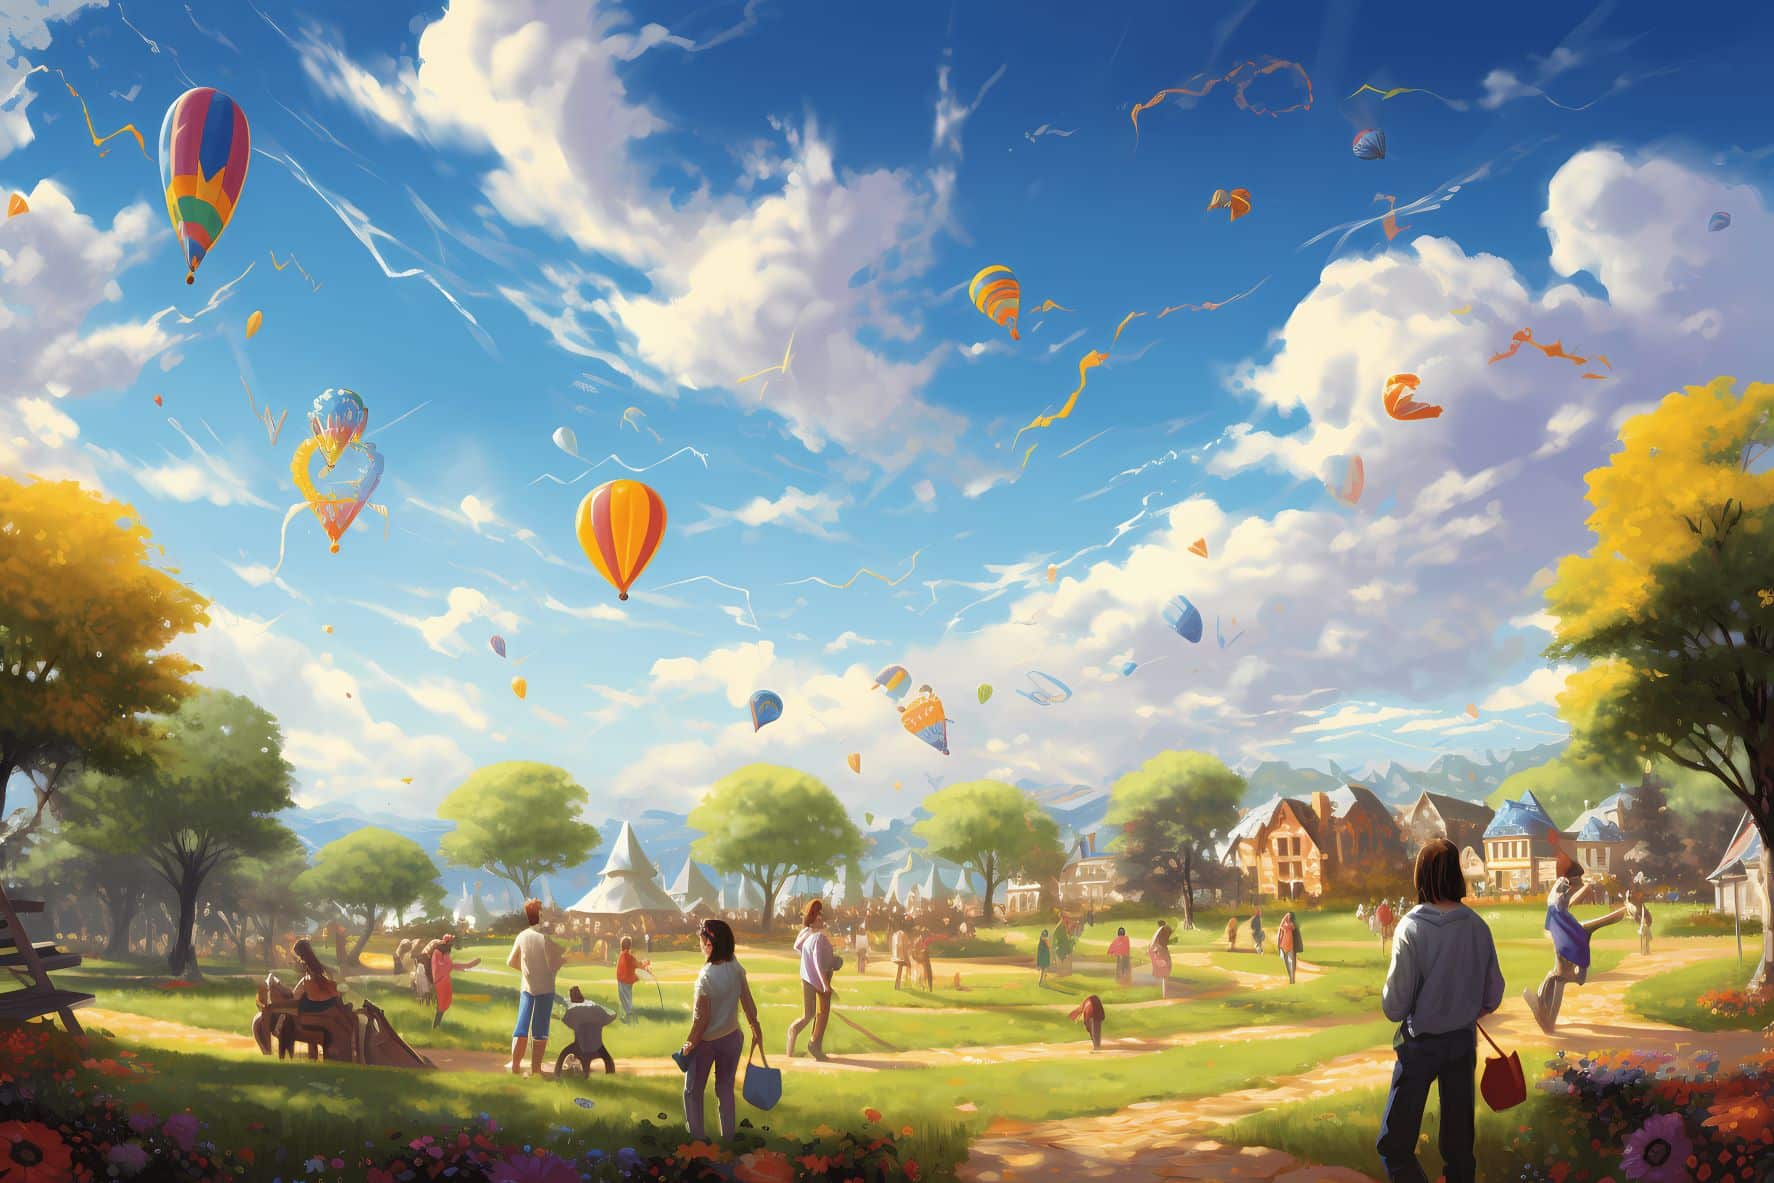 Balloons in the air on a beautiful day